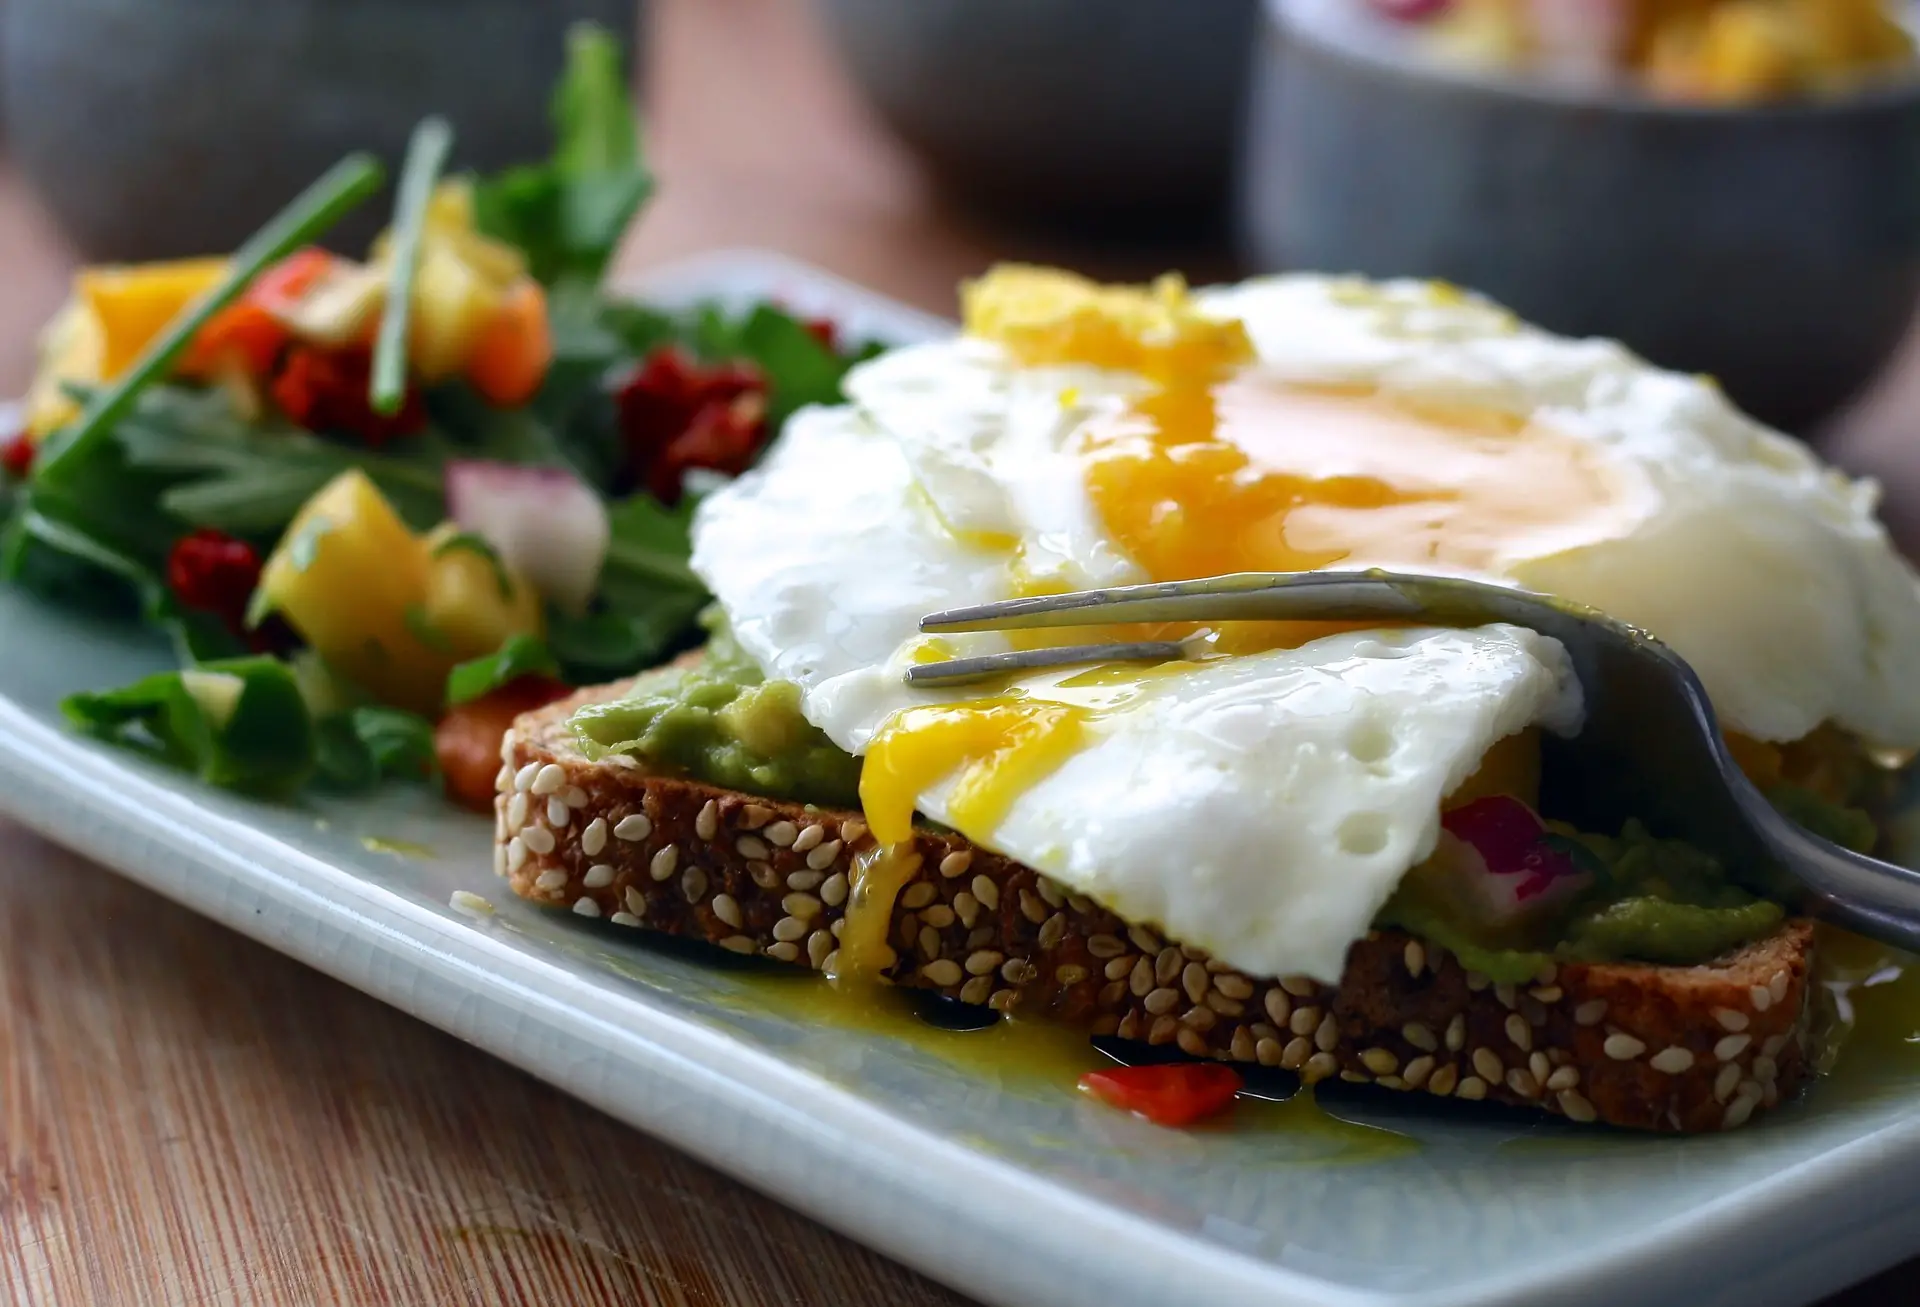 Egg- healhty breakfast to lose weight